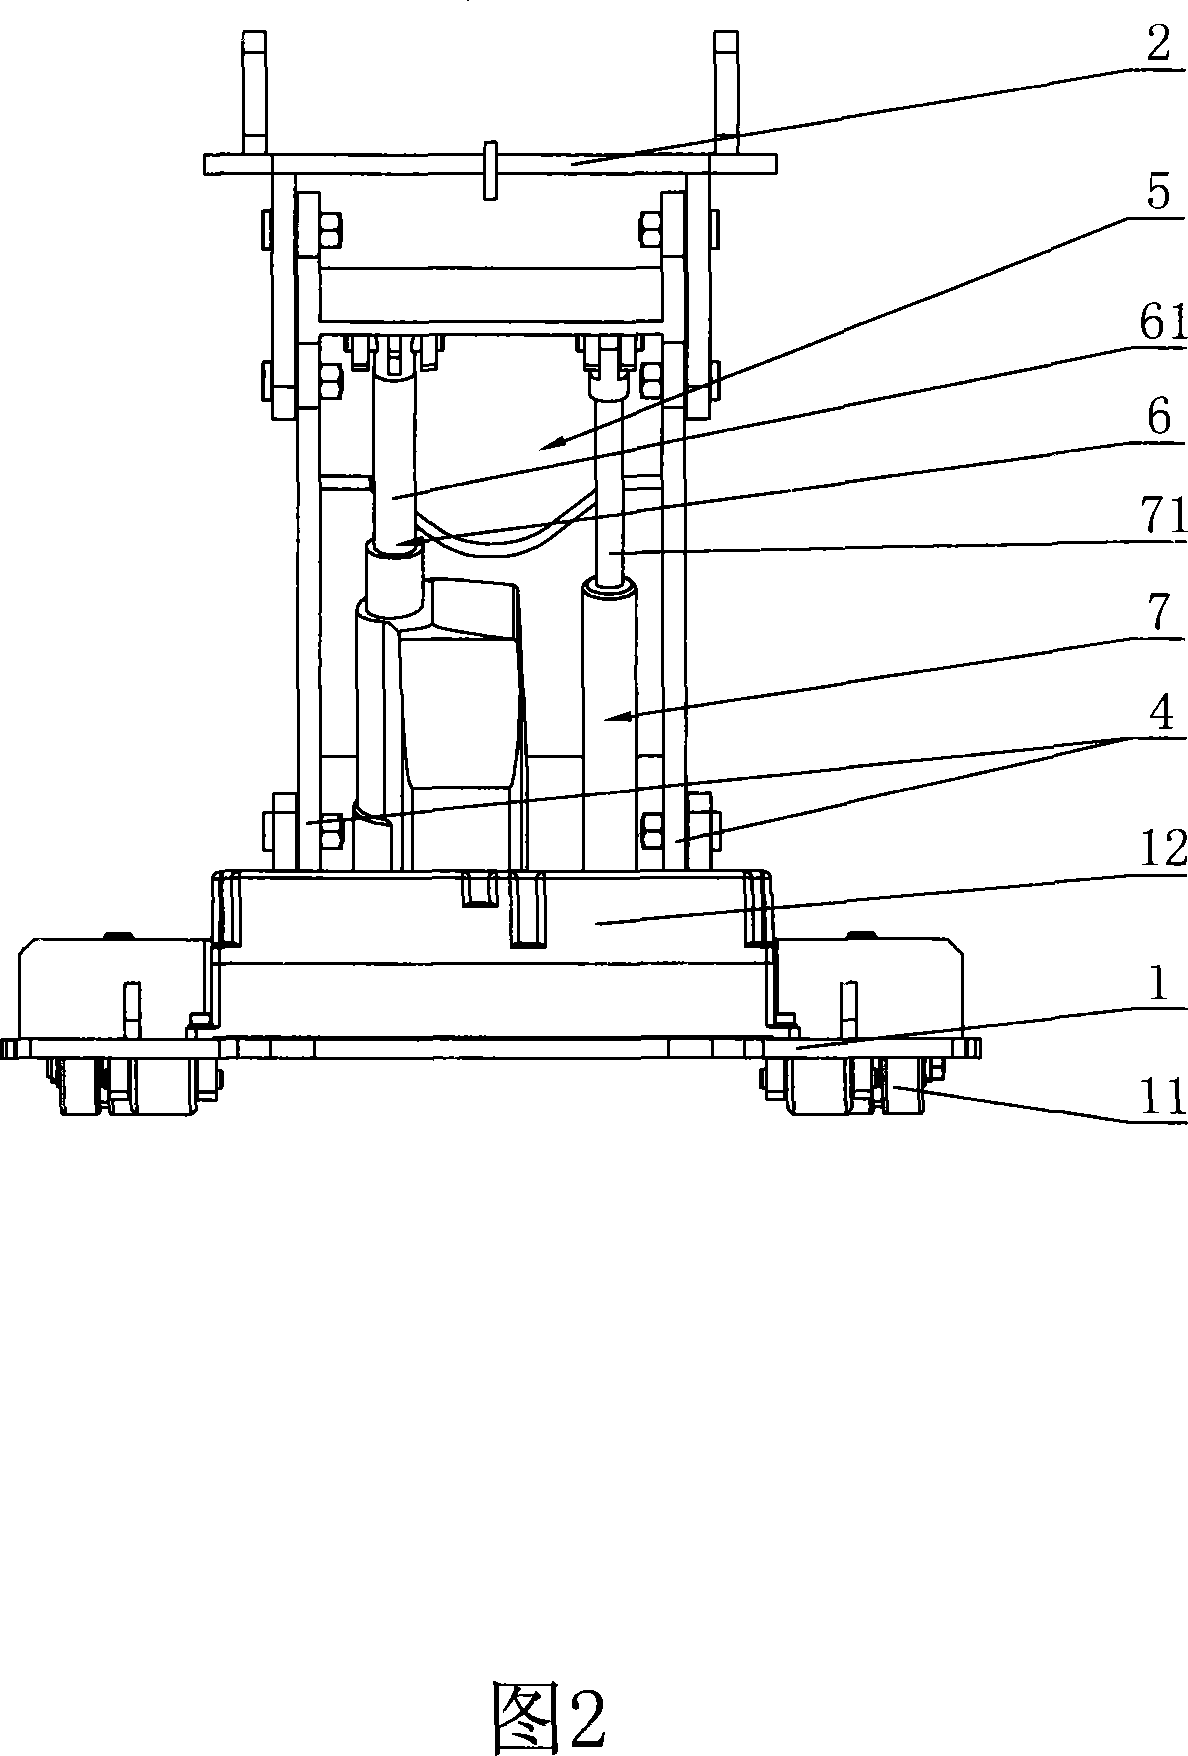 Lifting/lowering device for blood-drawing chair